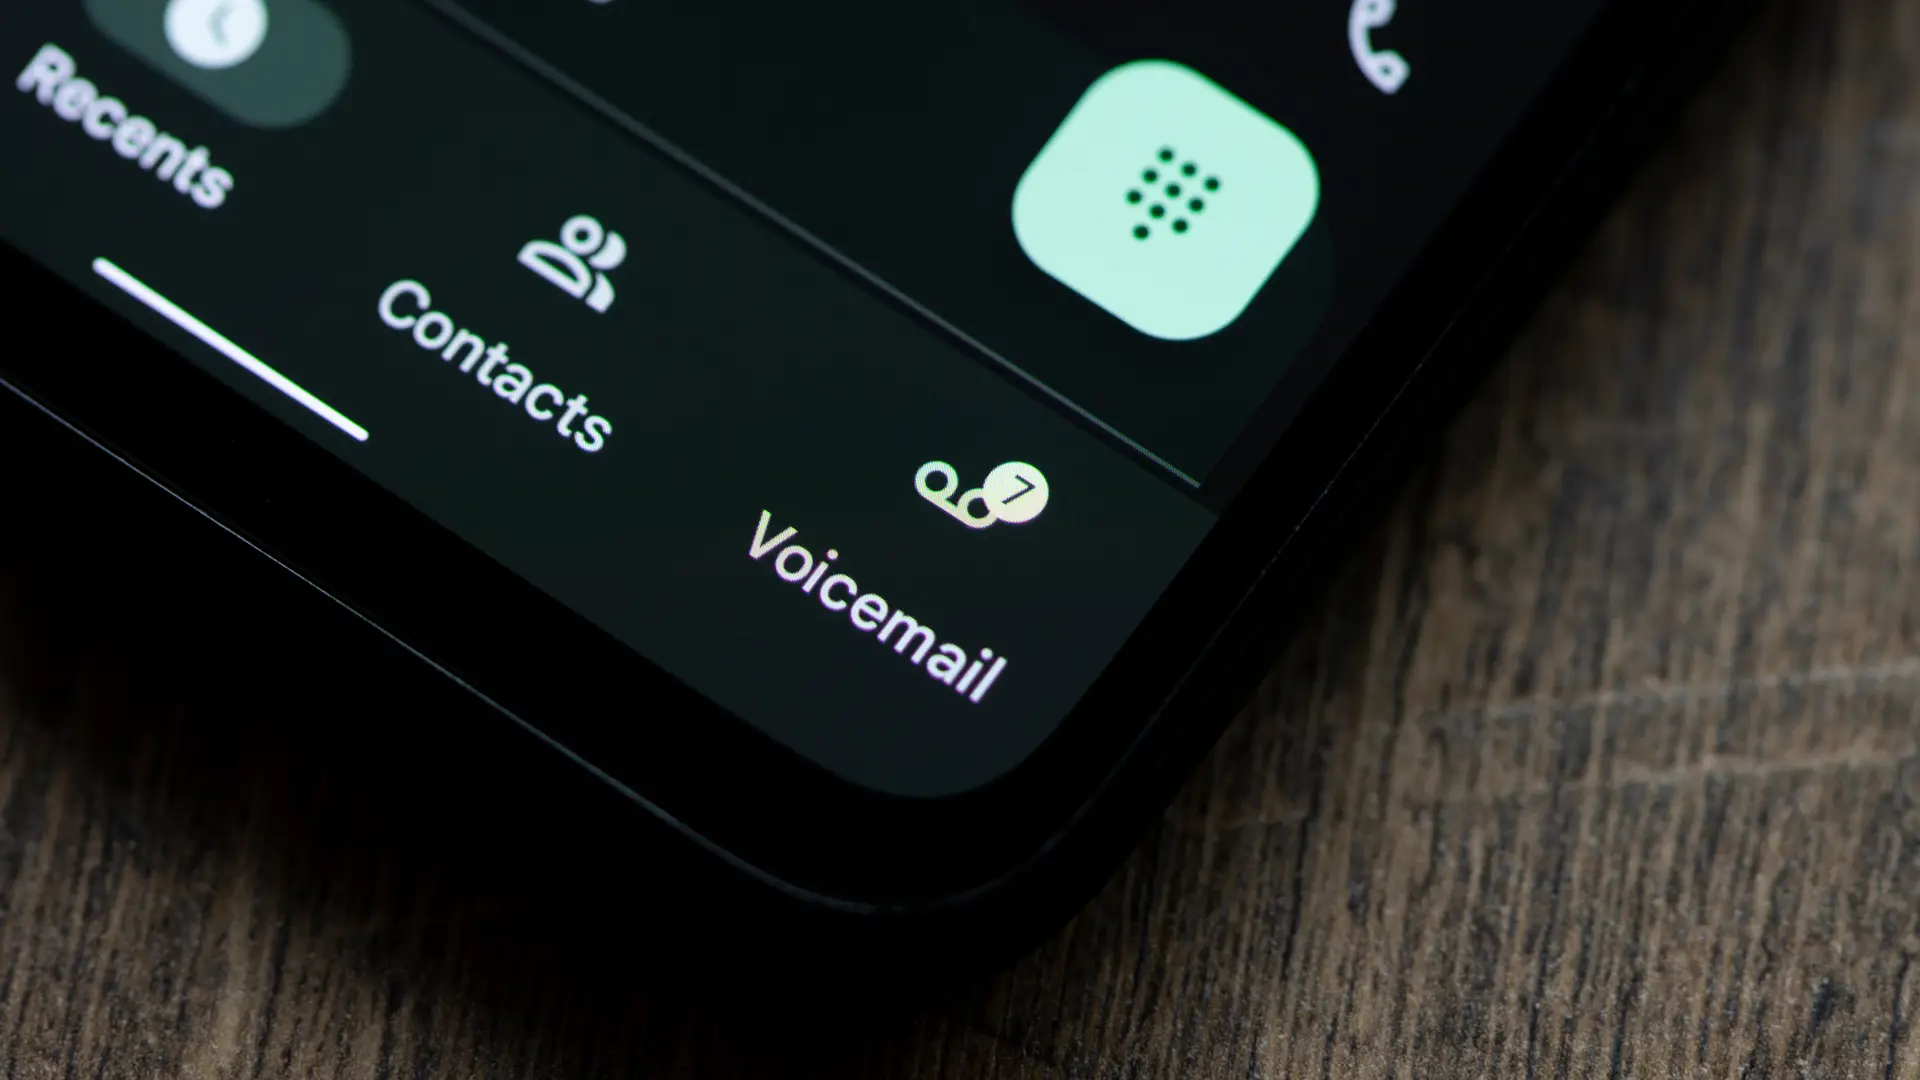 Voicemail icon on a phone screen that is a service you get with BT